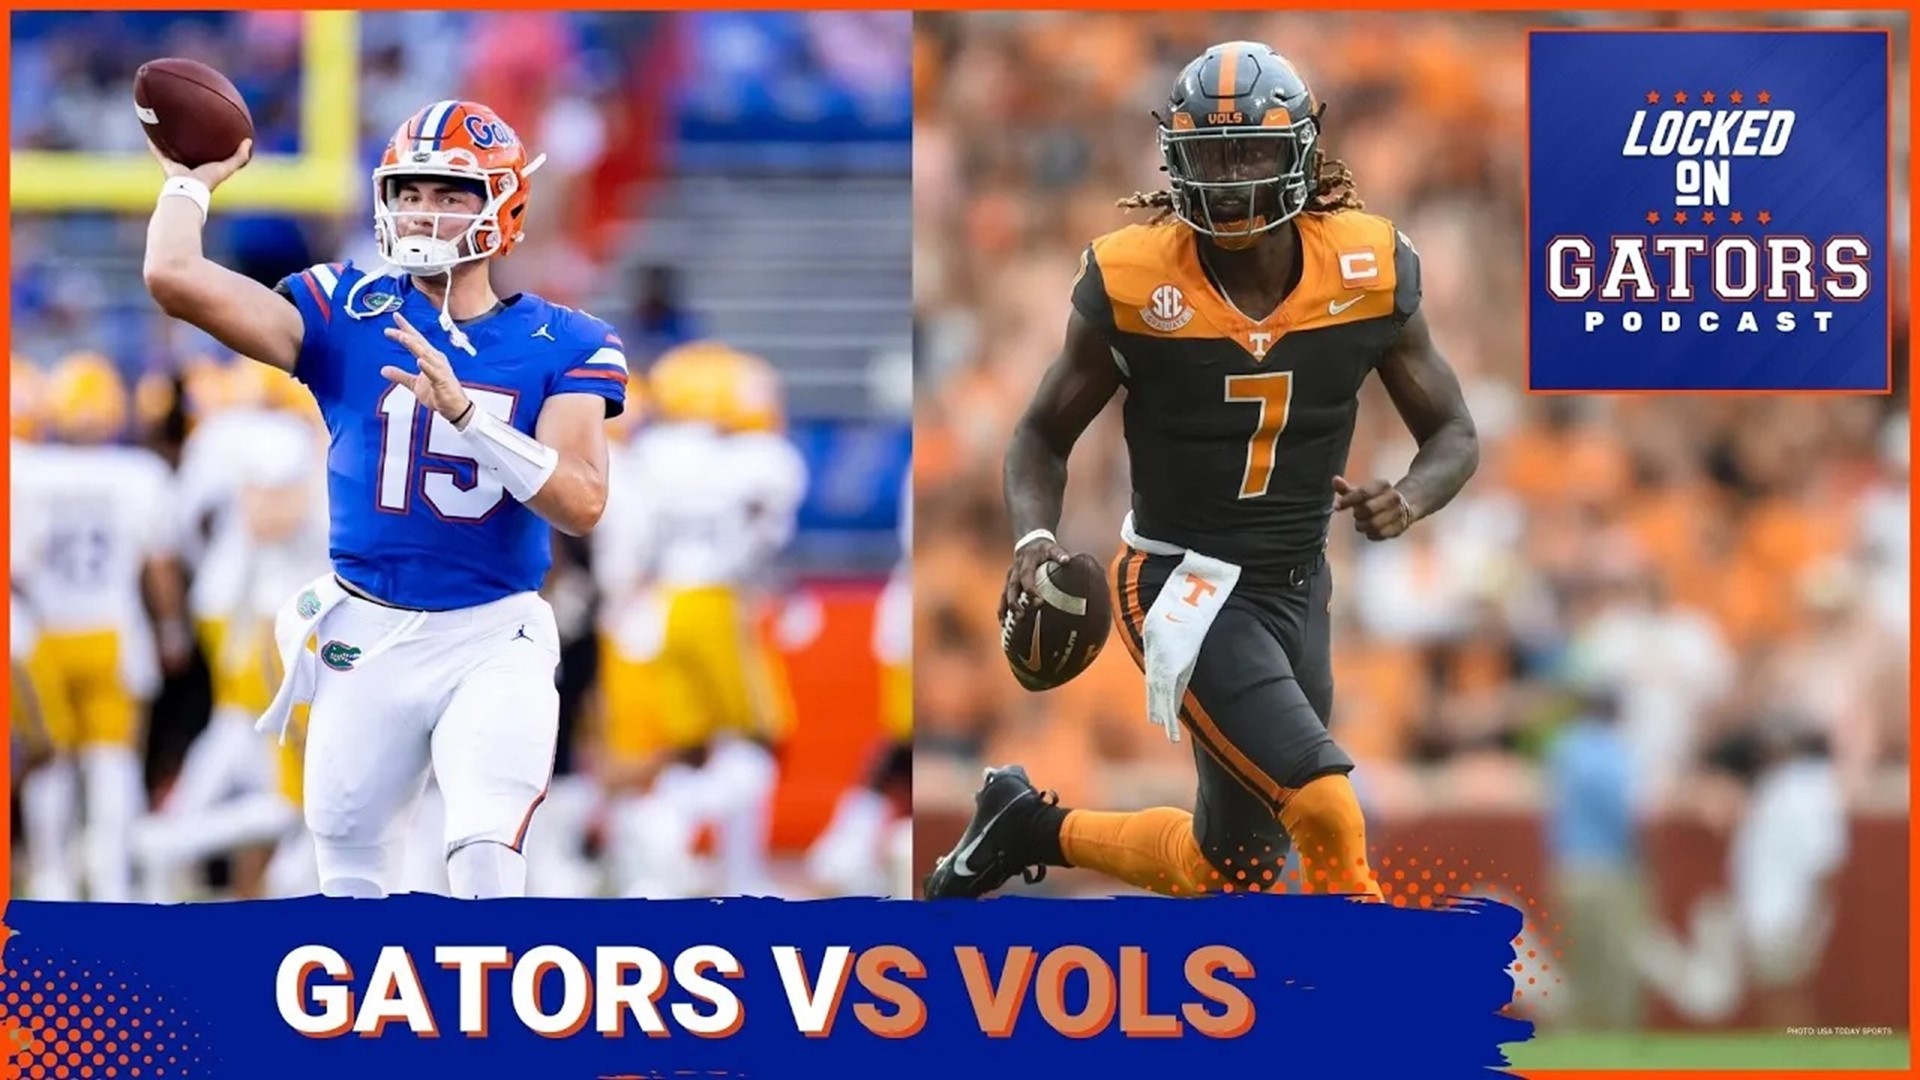 Welcome to a special crossover episode of Locked On Gators! Joining us are Chris Gordy, host of Locked On SEC, and Eric Cain, host of Locked On Vols.